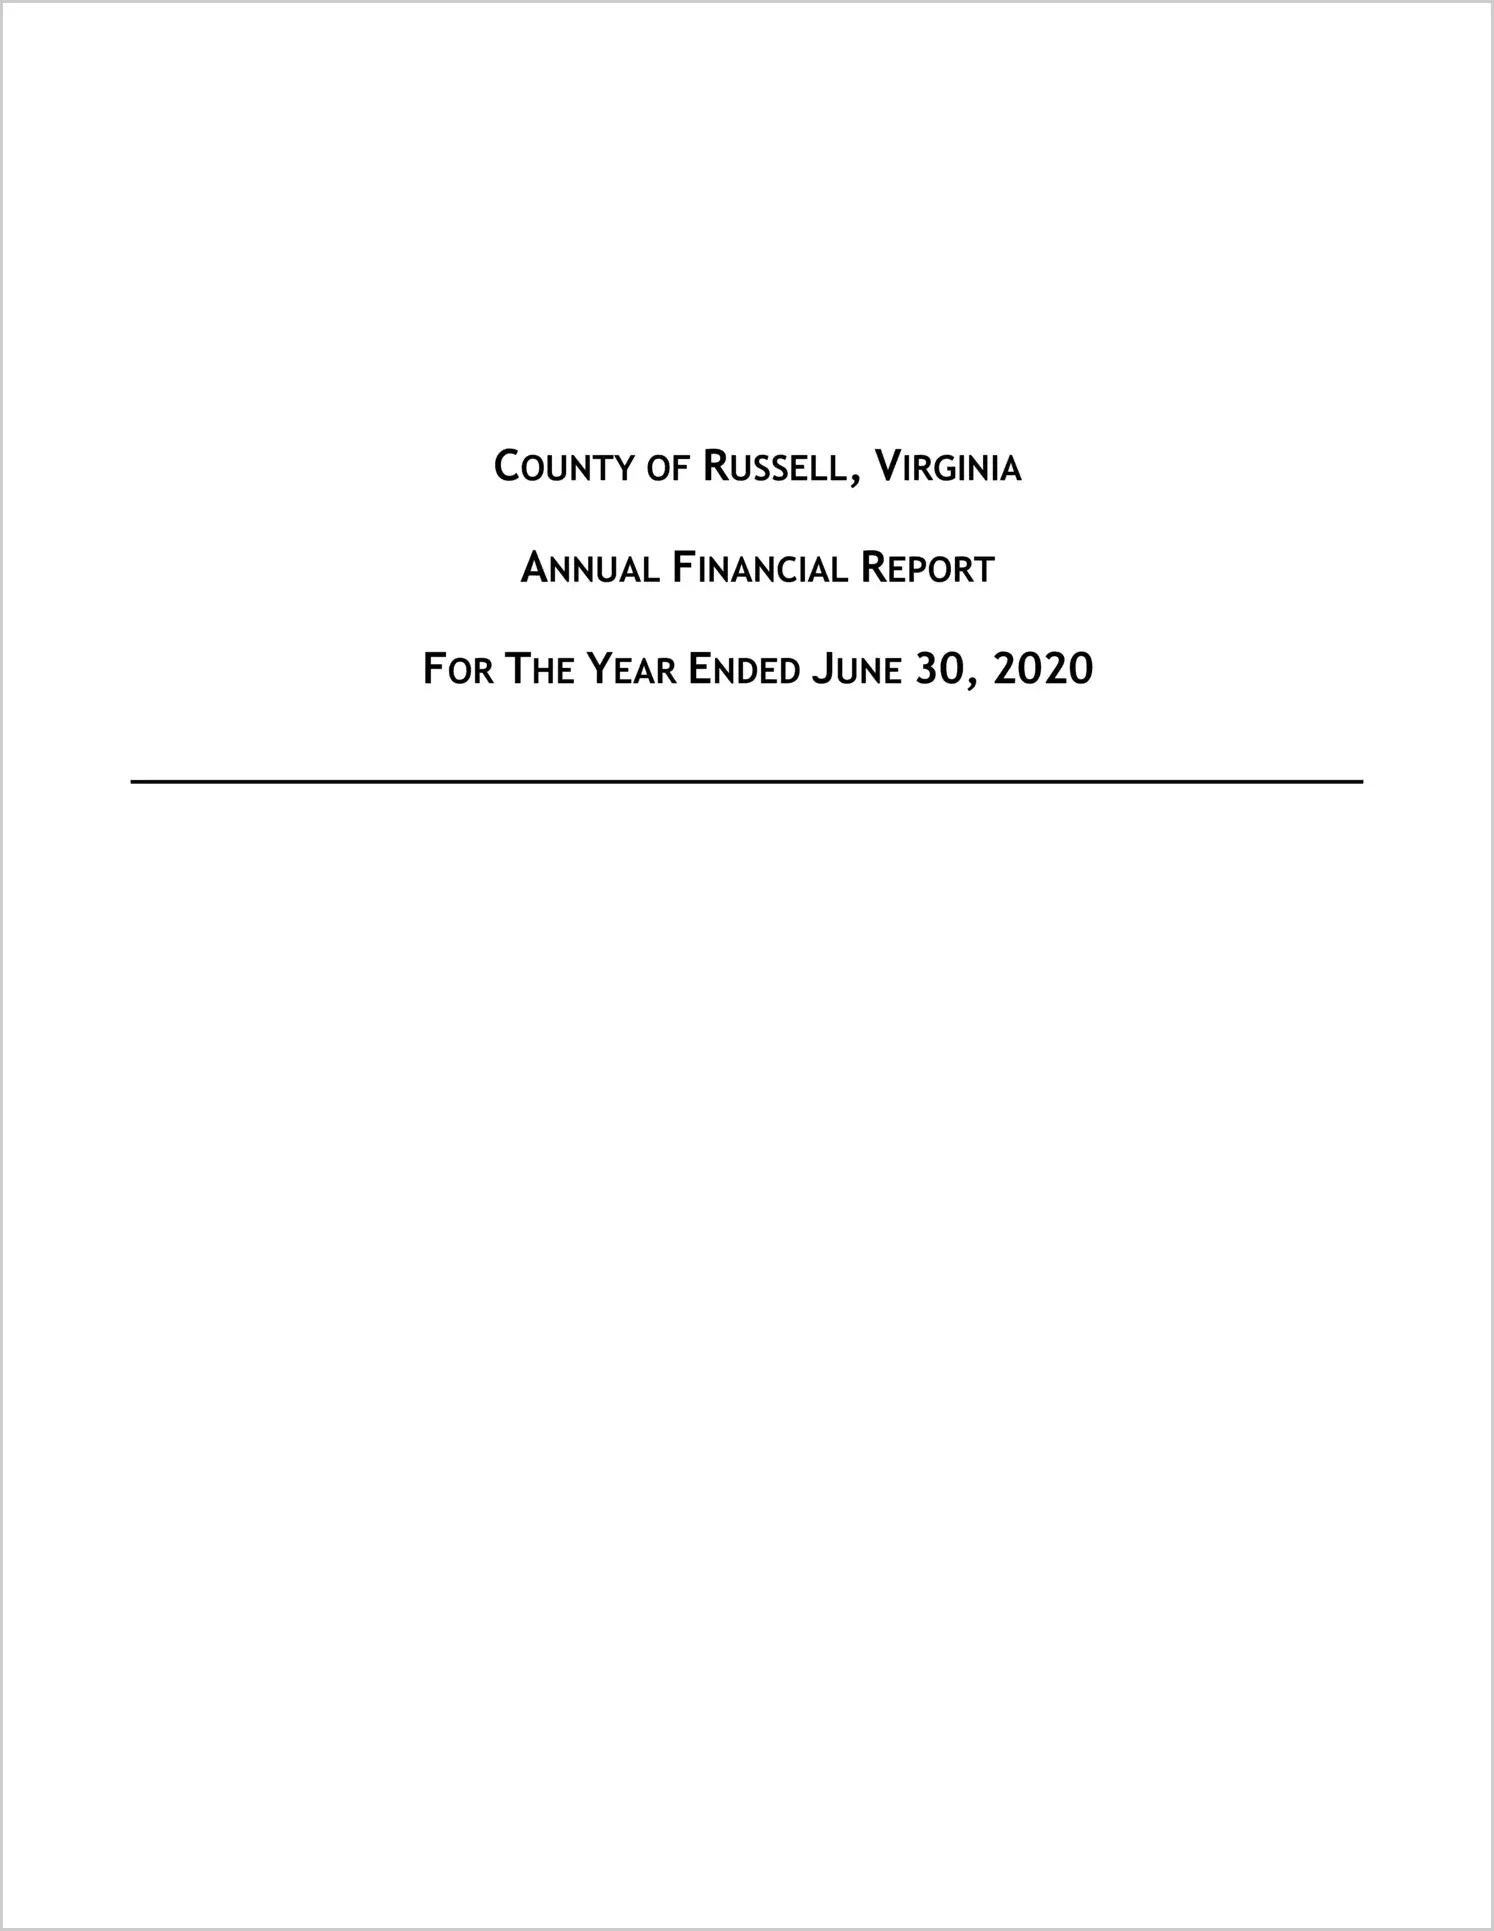 2020 Annual Financial Report for County of Russell